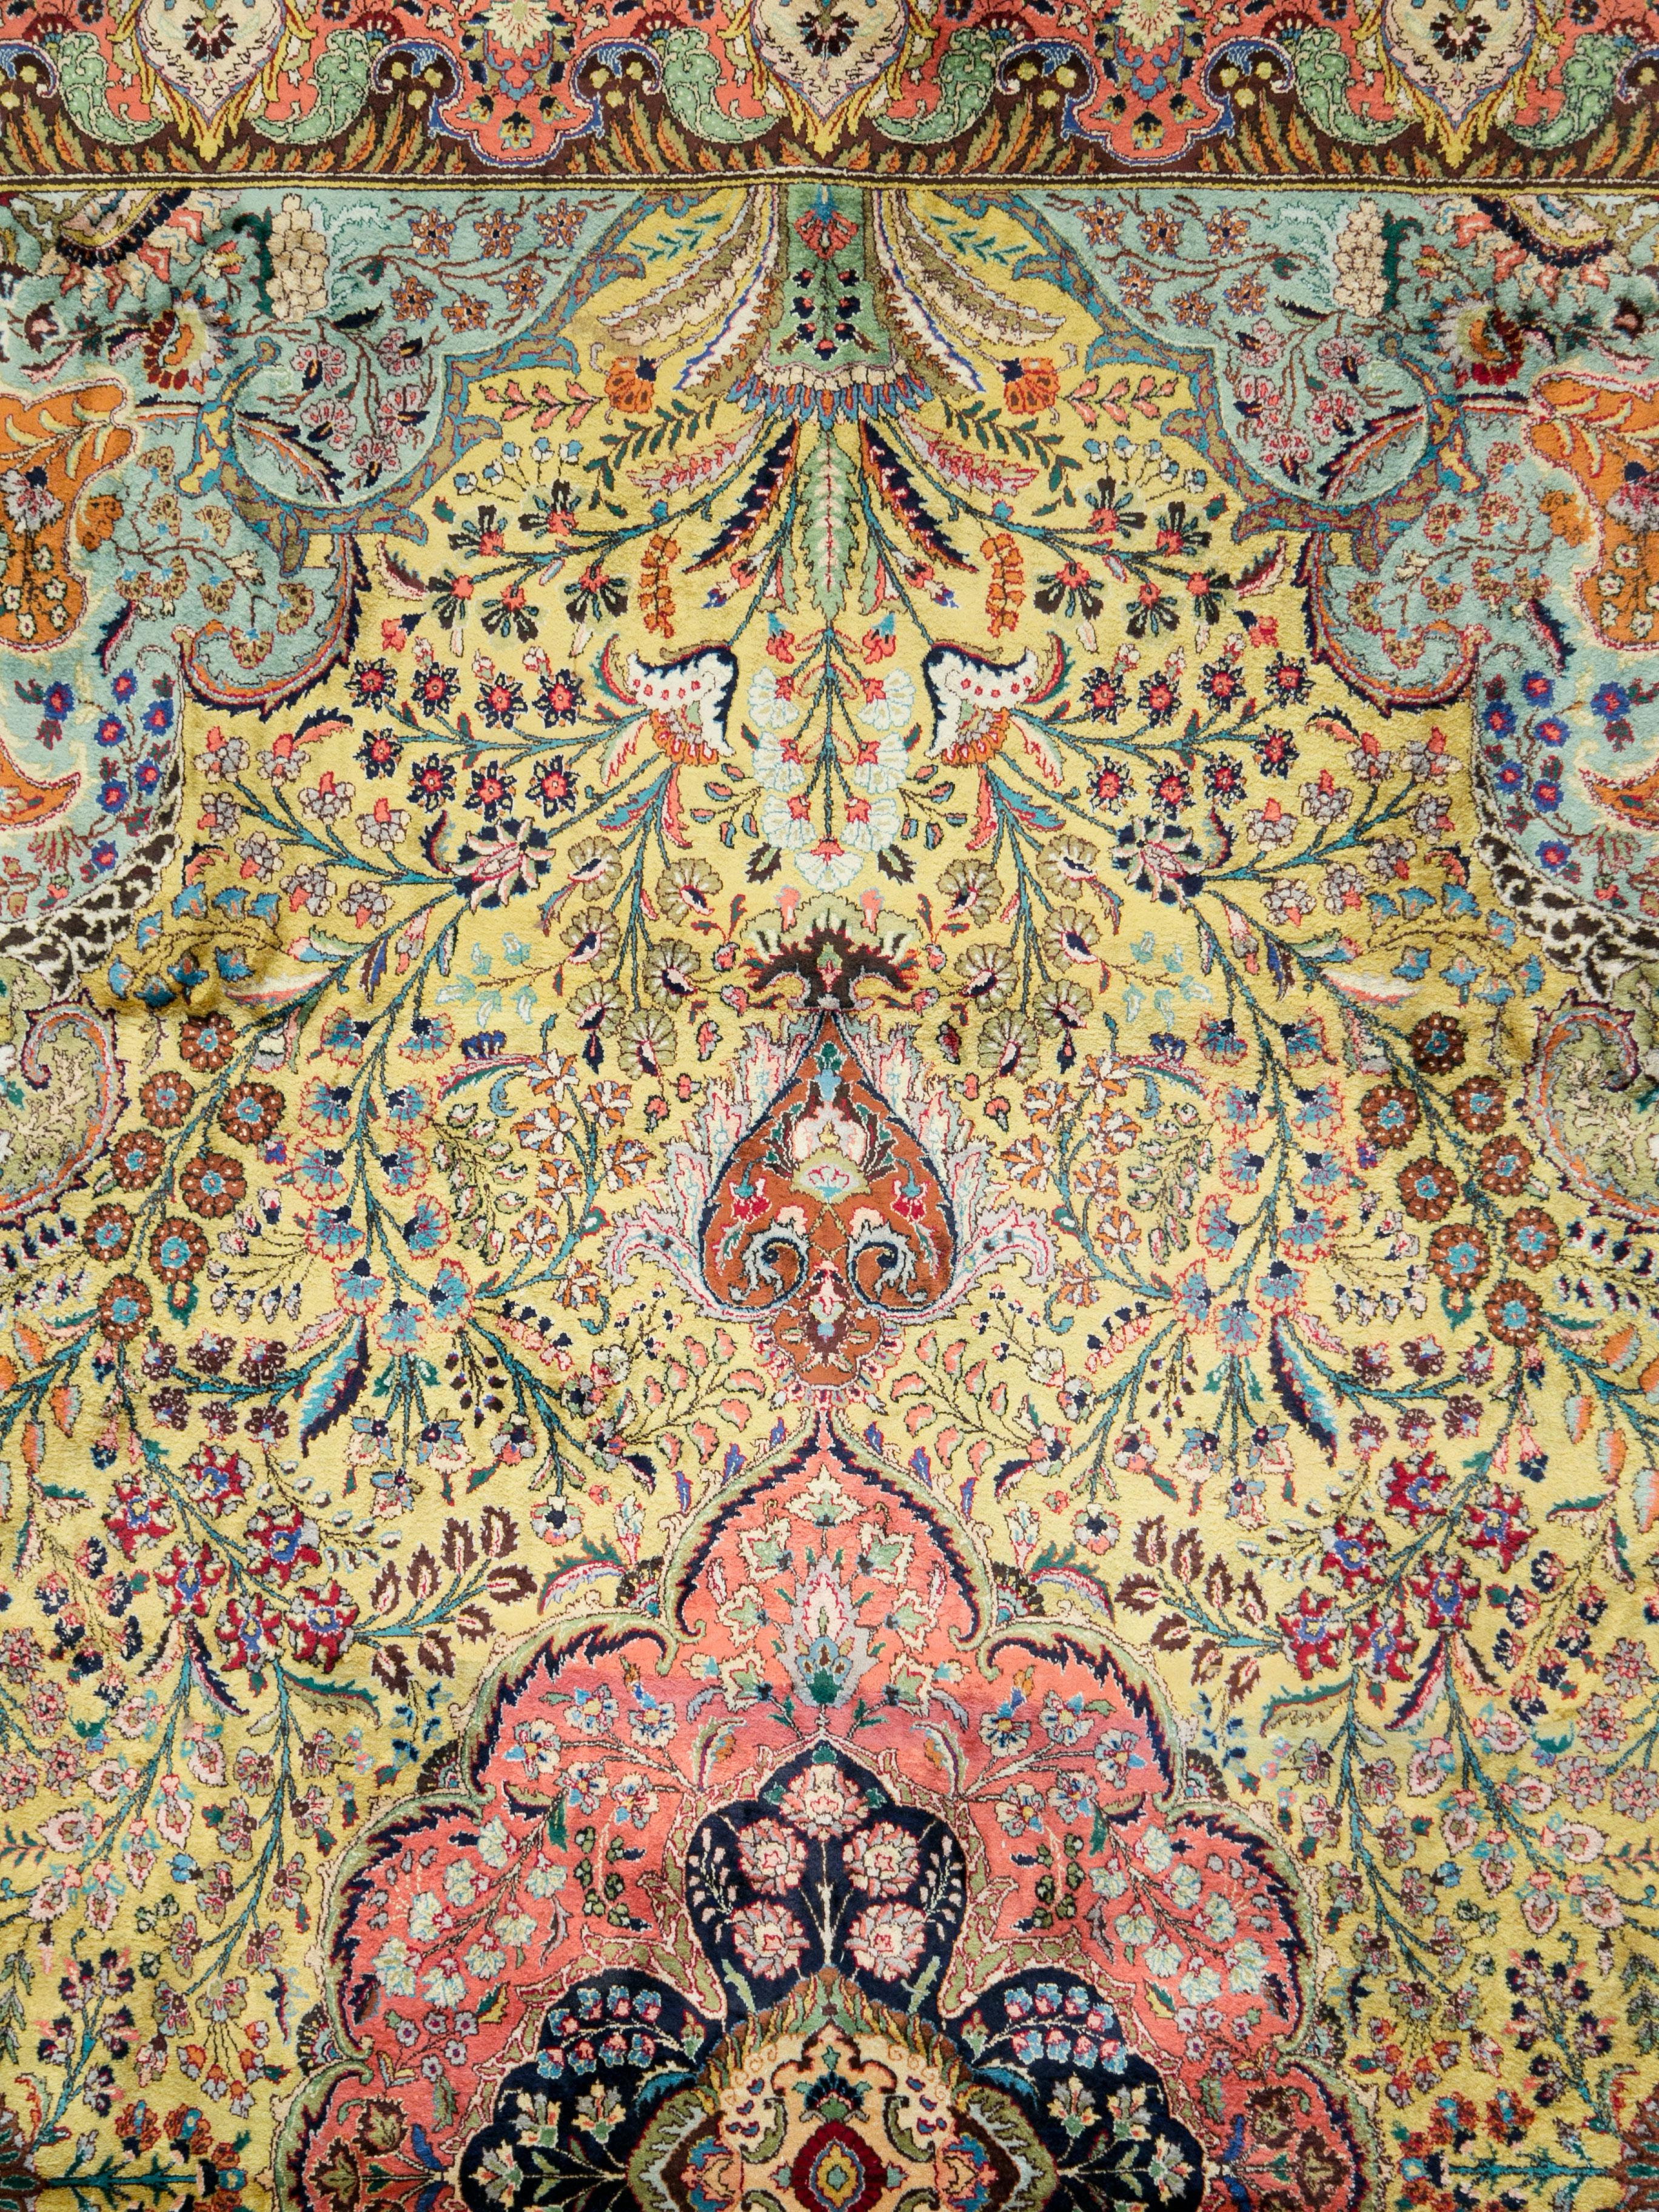 A vintage Persian Qum silk carpet from the mid-20th century. An extremely intricate pattern in a 'horror vacui' style with a wide color palette gives this Qum a very opulent look. Its long silk pile and finely knotted silk foundation feels soft to